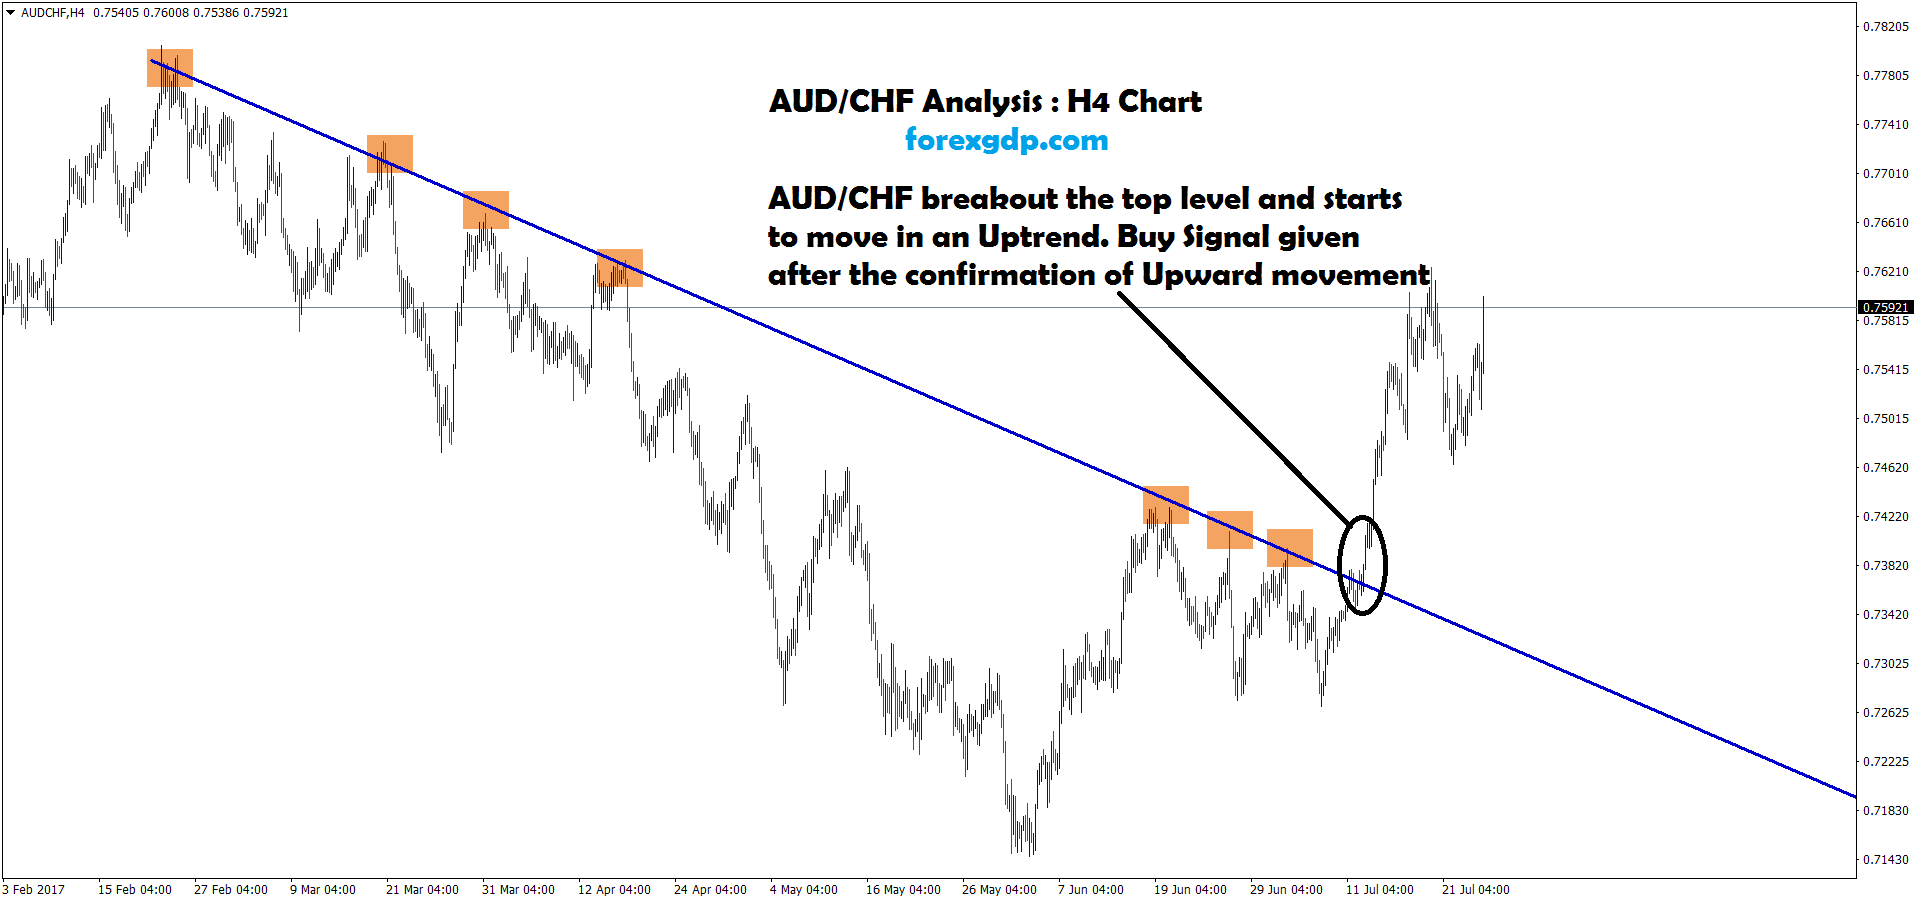 AUDCHF forecast on breakout chart at the top level